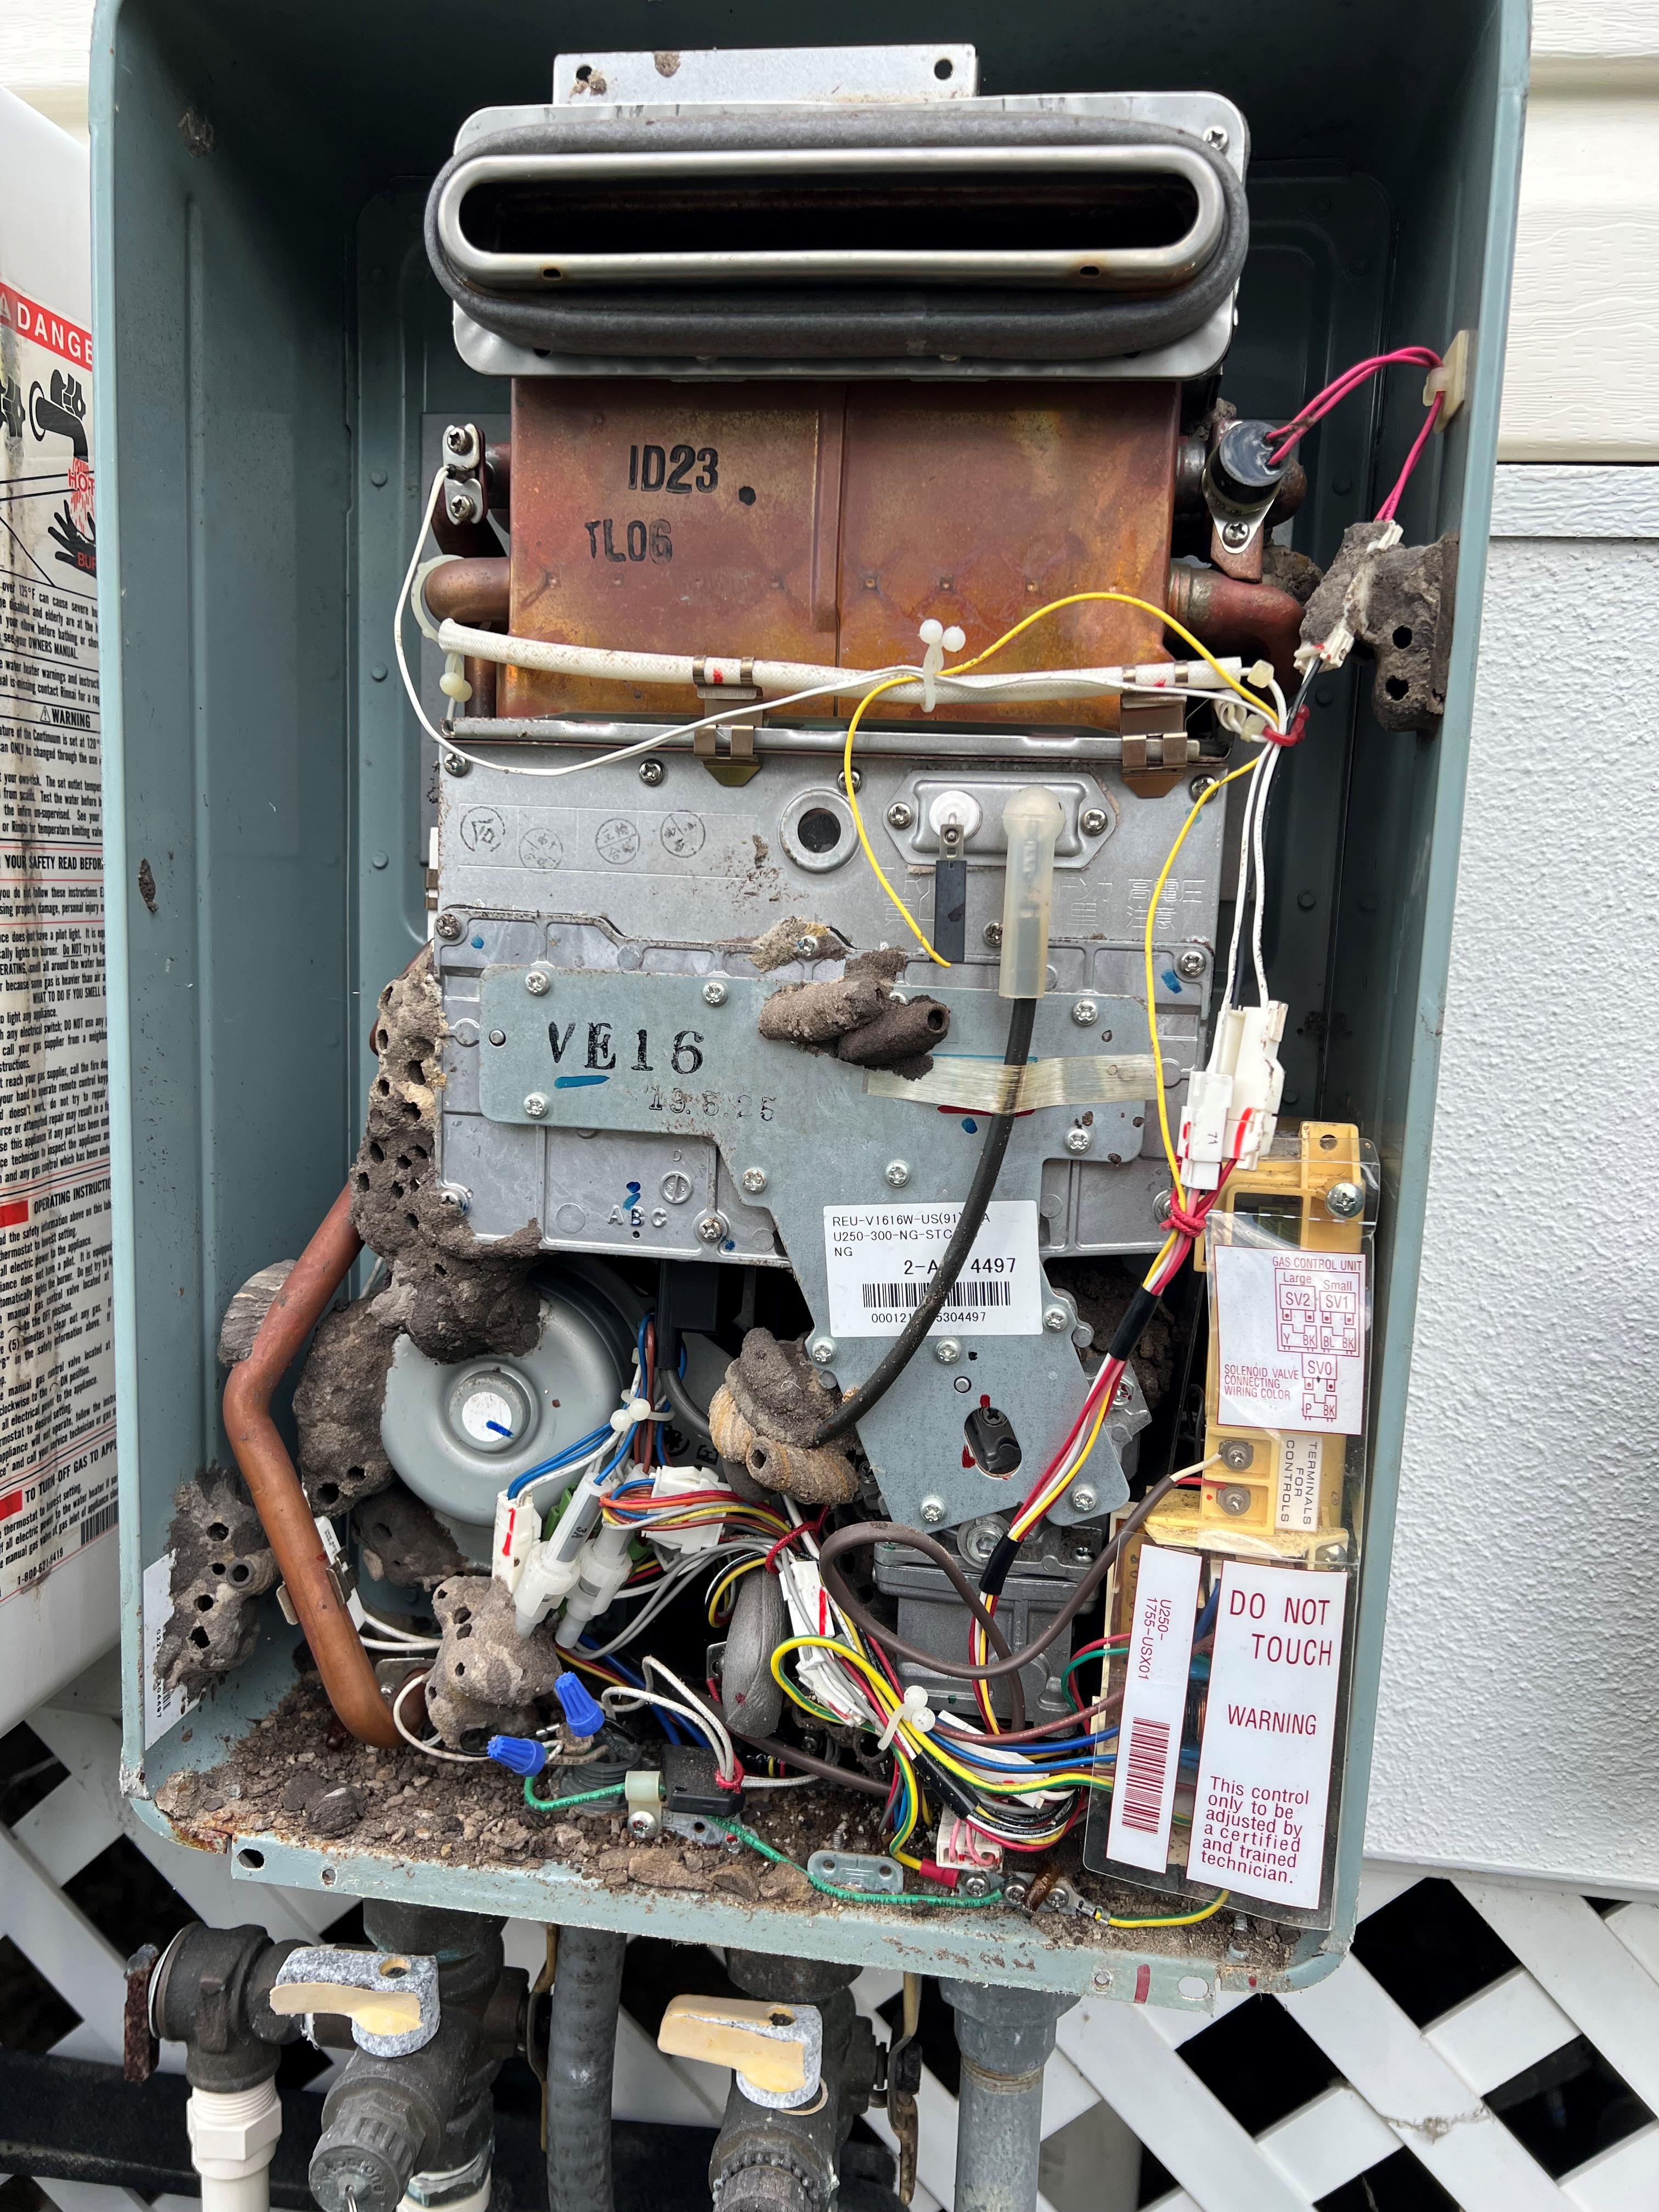 tankless water heater with mud hornet nests all over it